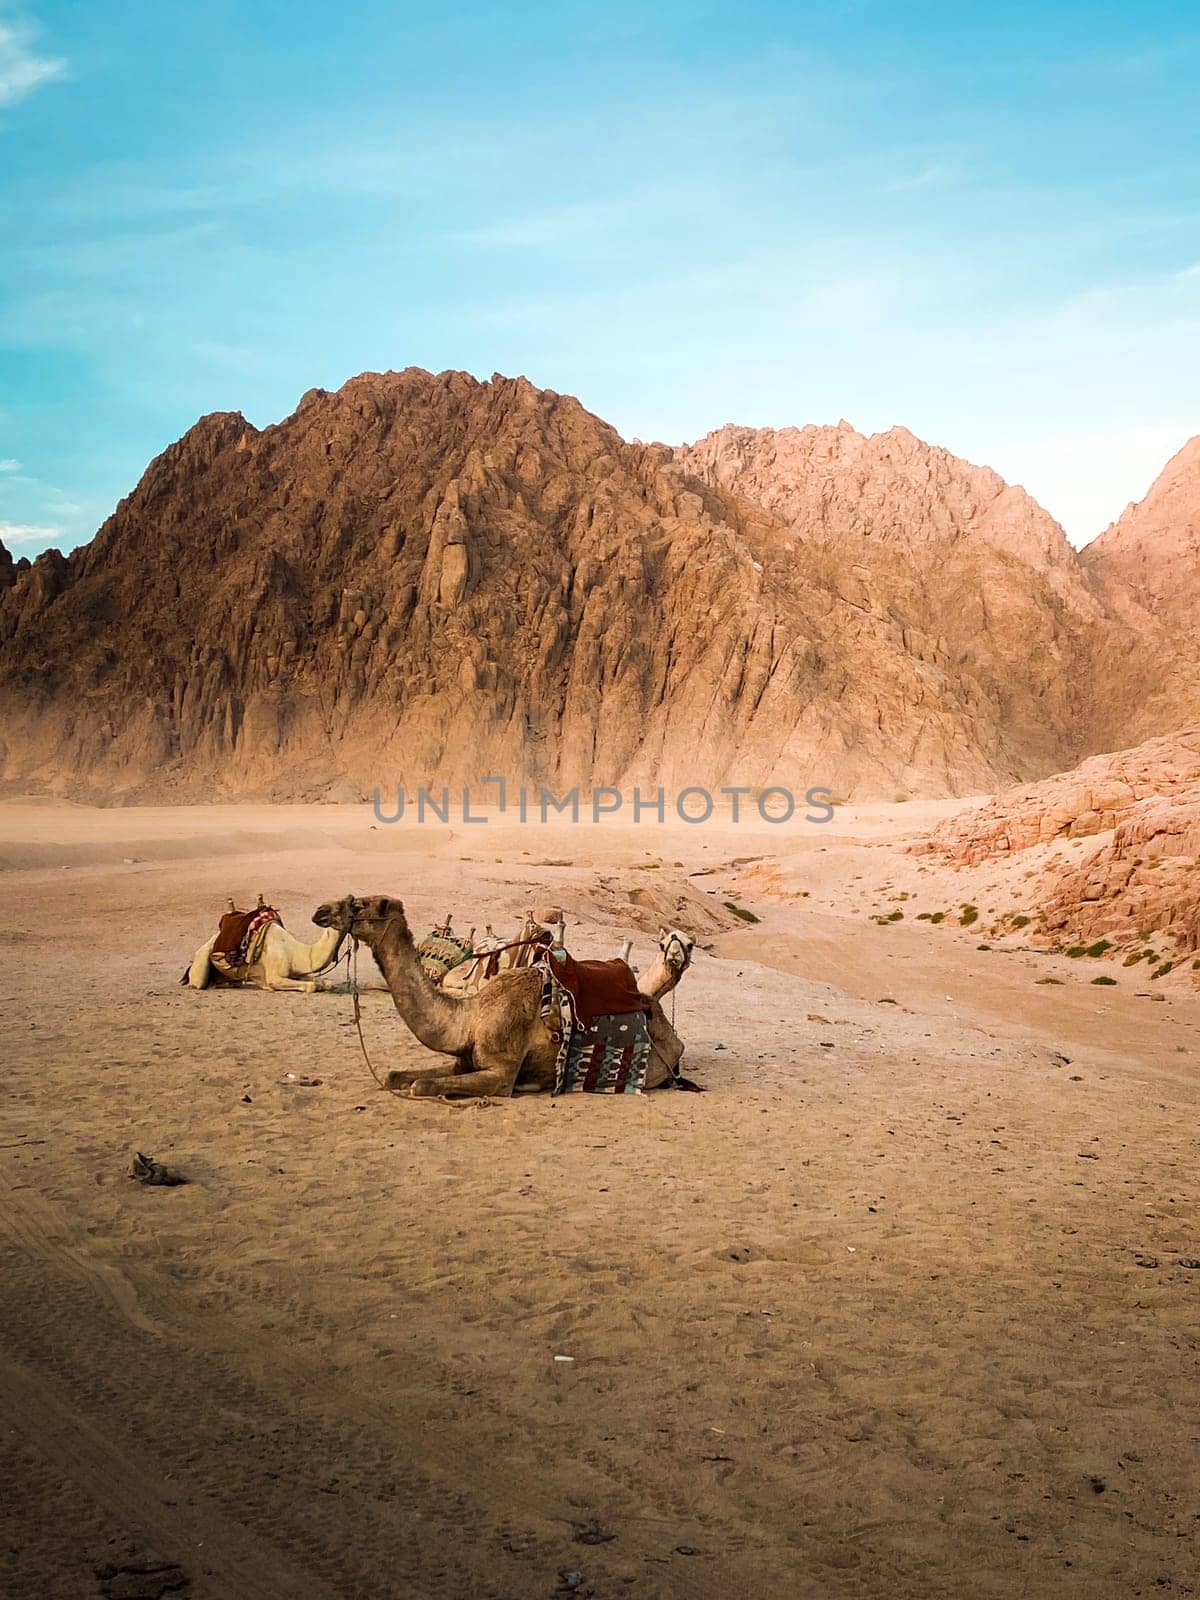 Camel in the desert in front of a mountain in bright daylight. High quality photo